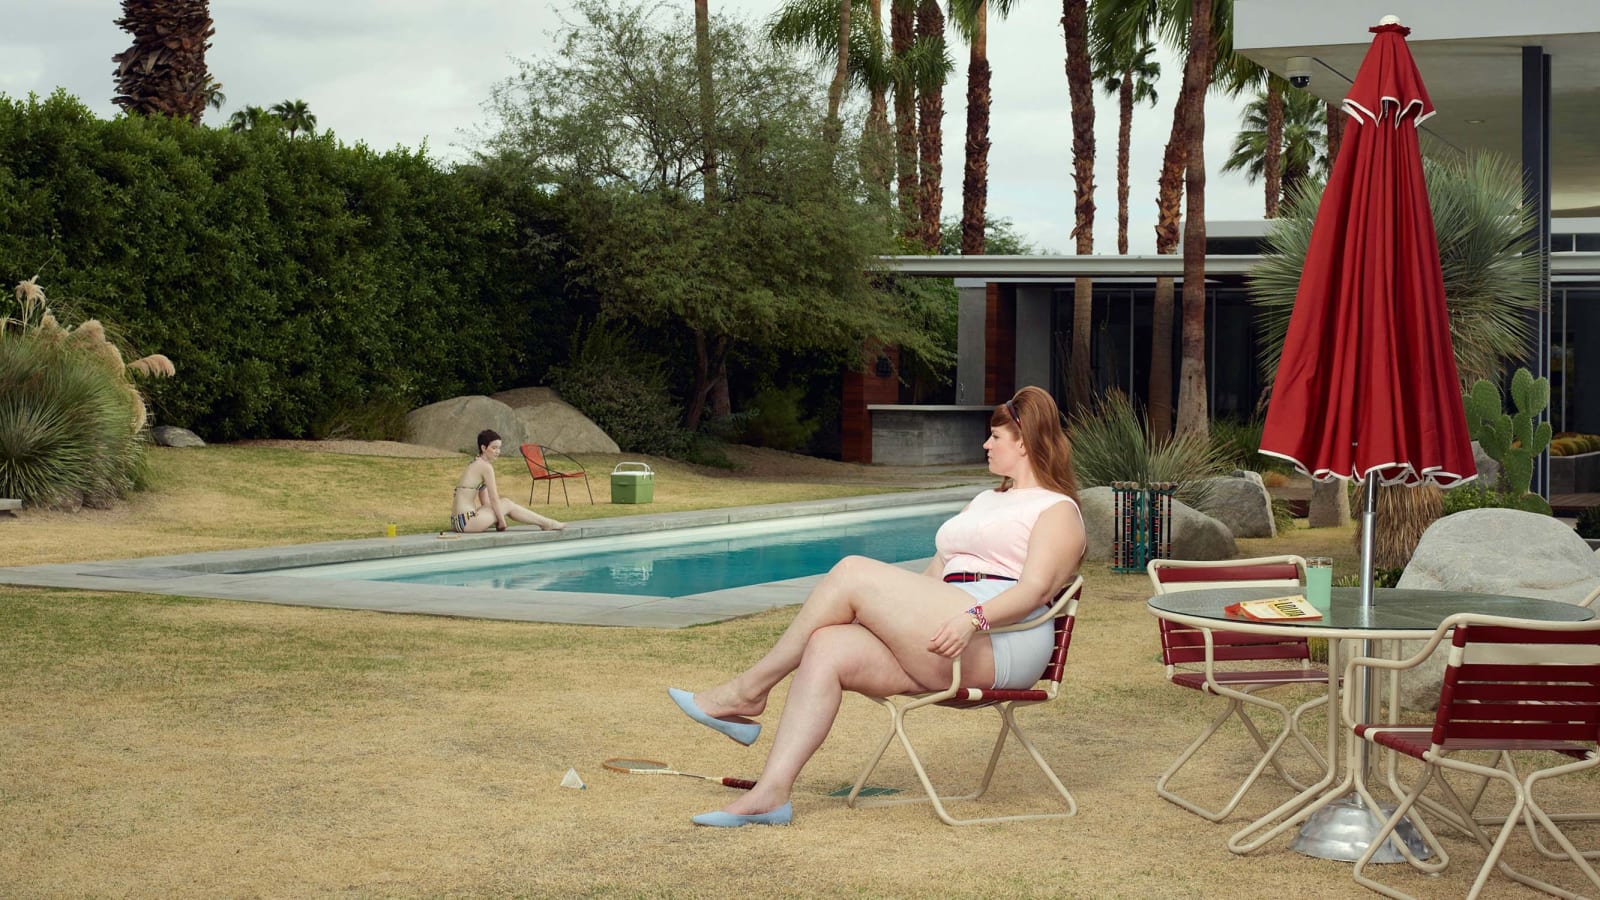 Two women sitting by pool in Palm Springs, California by Erwin Olaf